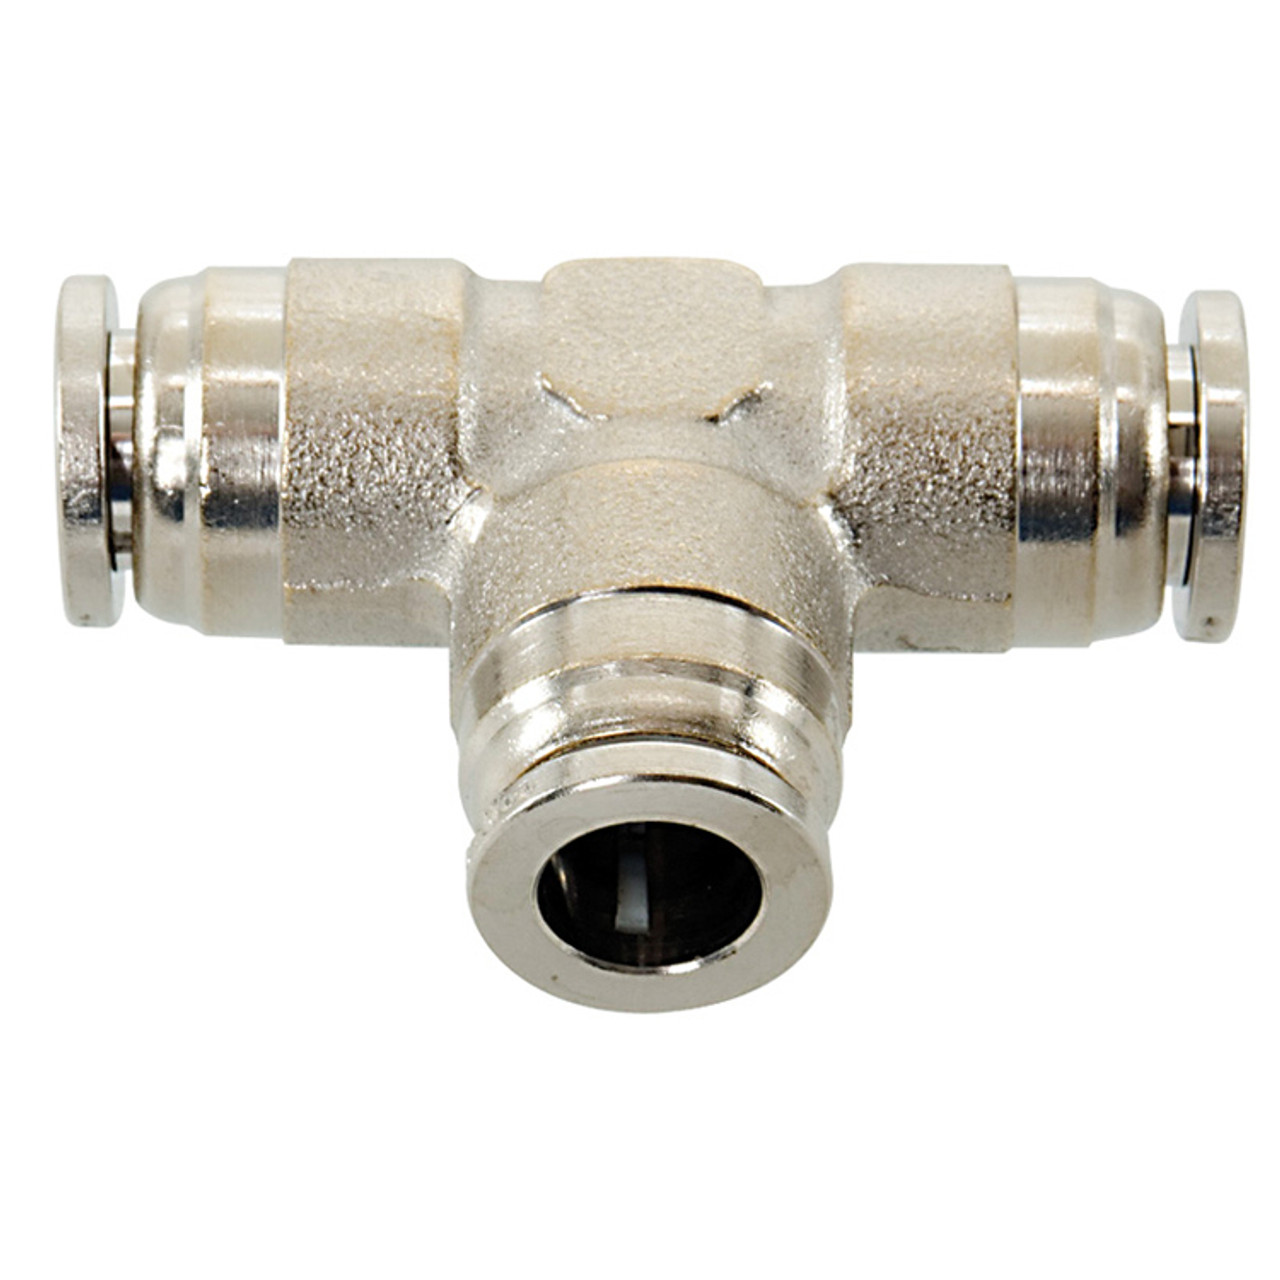 3/8" Nickel Plated Brass Push-To-Connect Tee   G60T00P-06-06